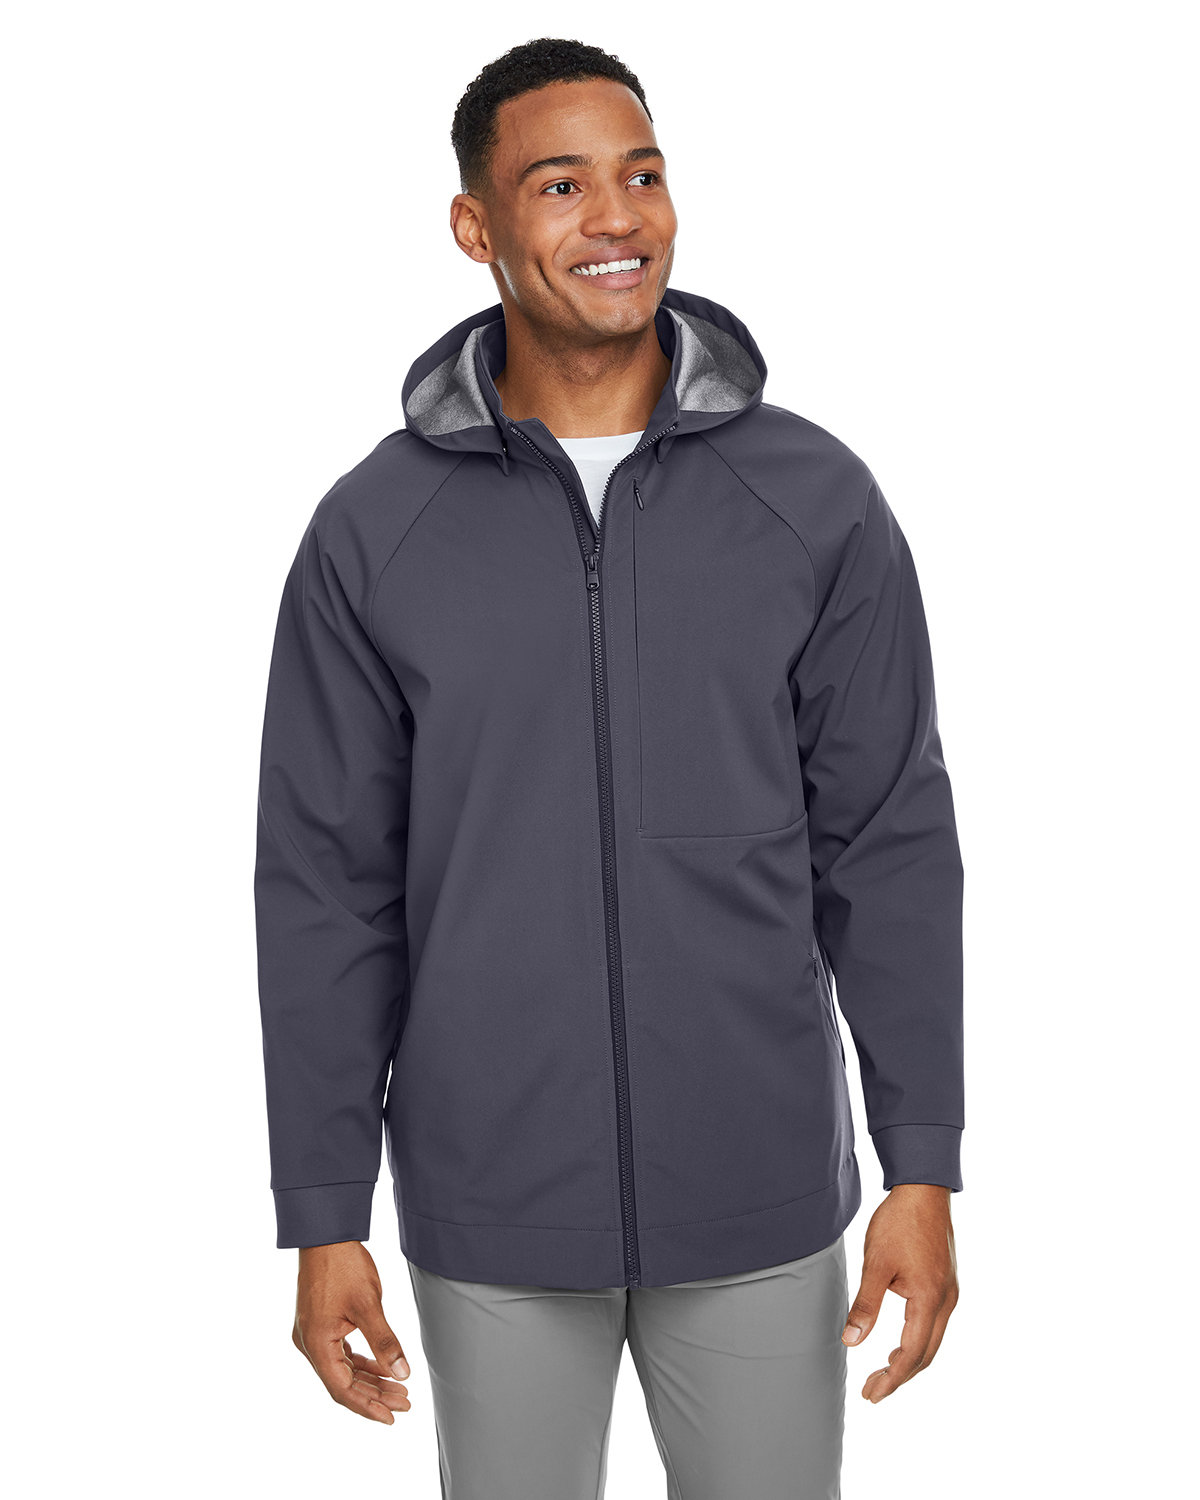 North End Men's City Hybrid Soft Shell Hooded Jacket CARBON 